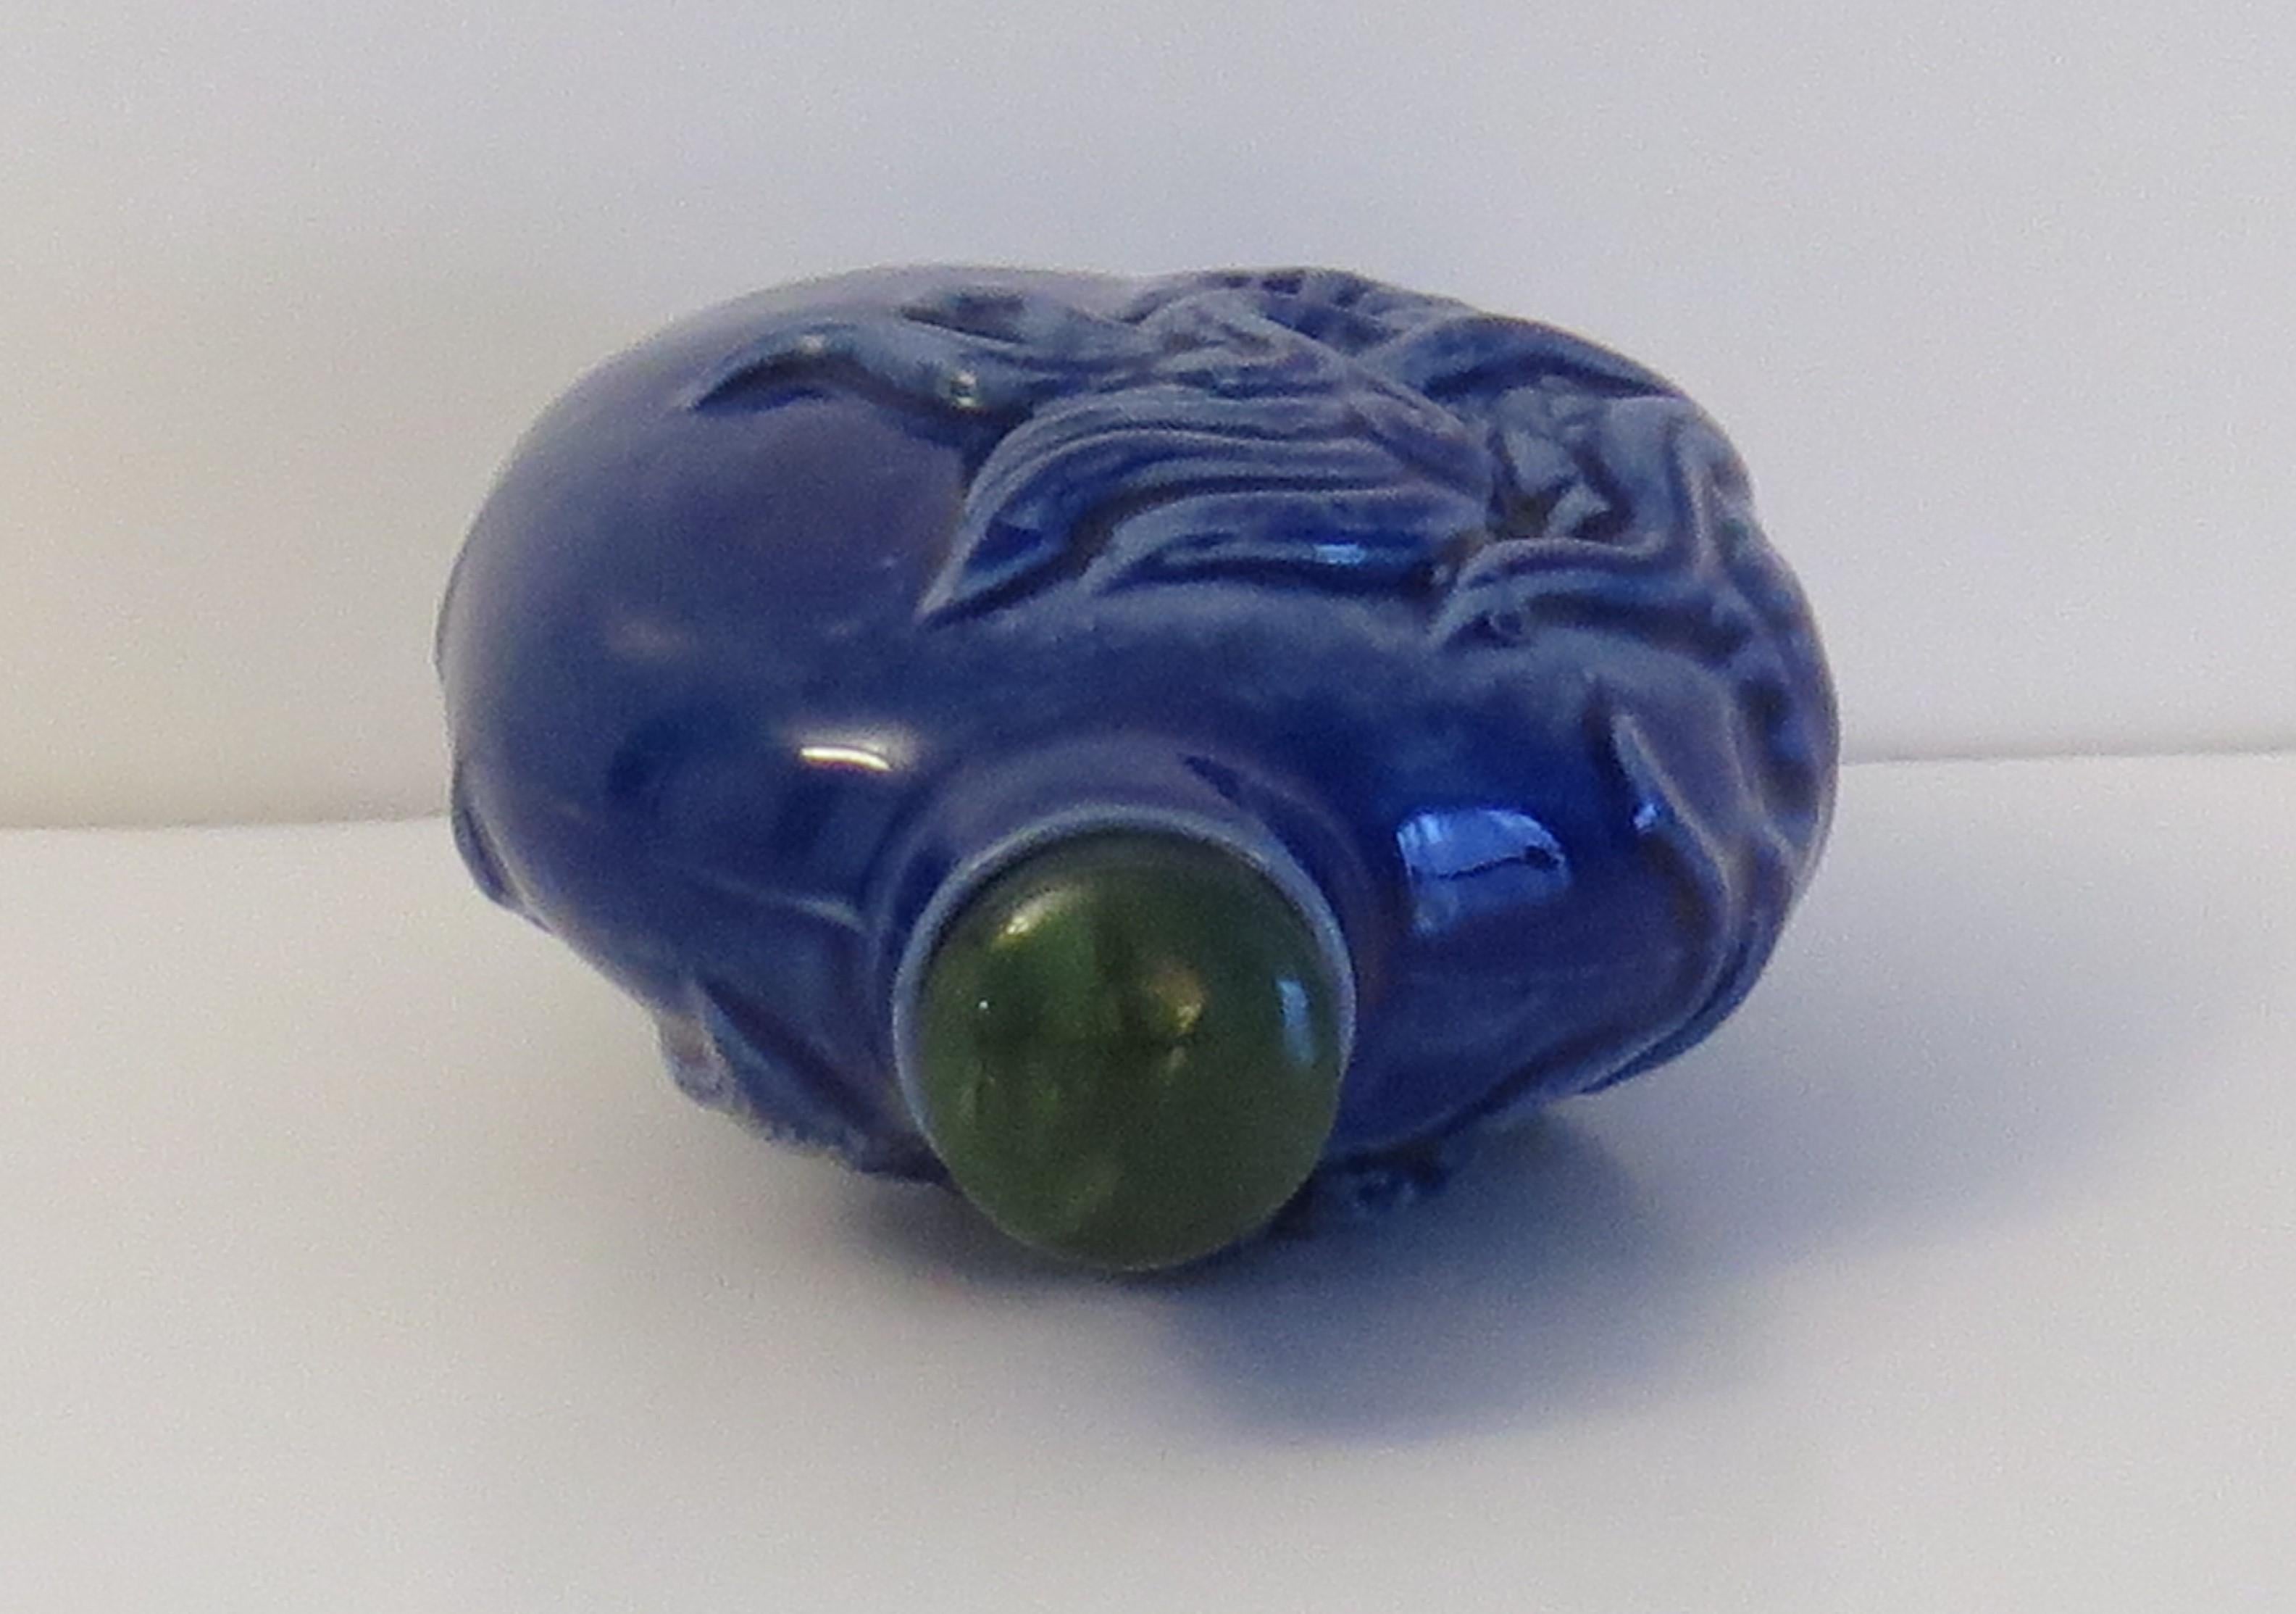 Chinese Porcelain Snuff Bottle moulded dragon stone top with spoon, Circa 1930s 1